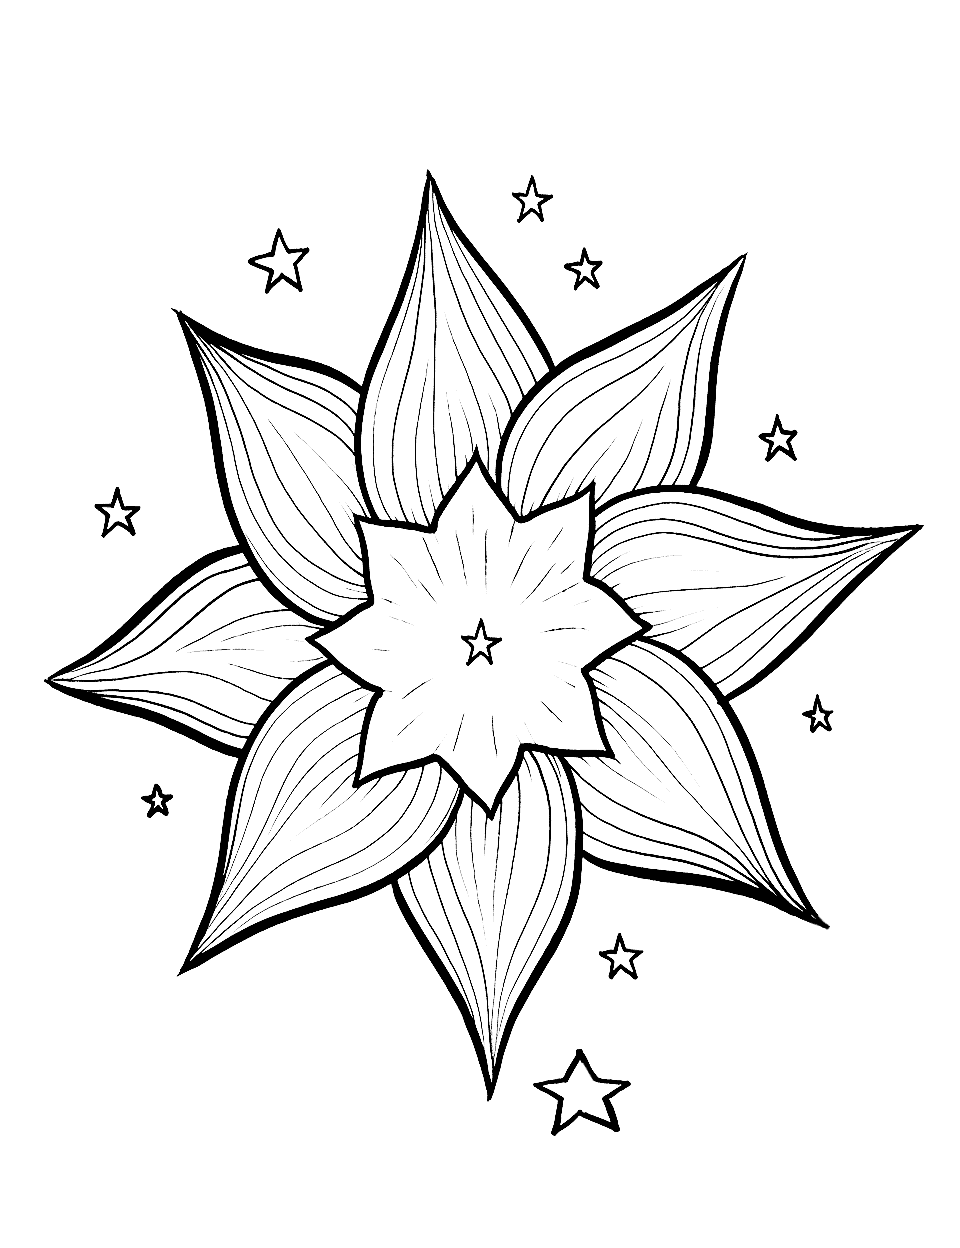 Starflower Coloring Page - A flower design with a star pattern in its center.